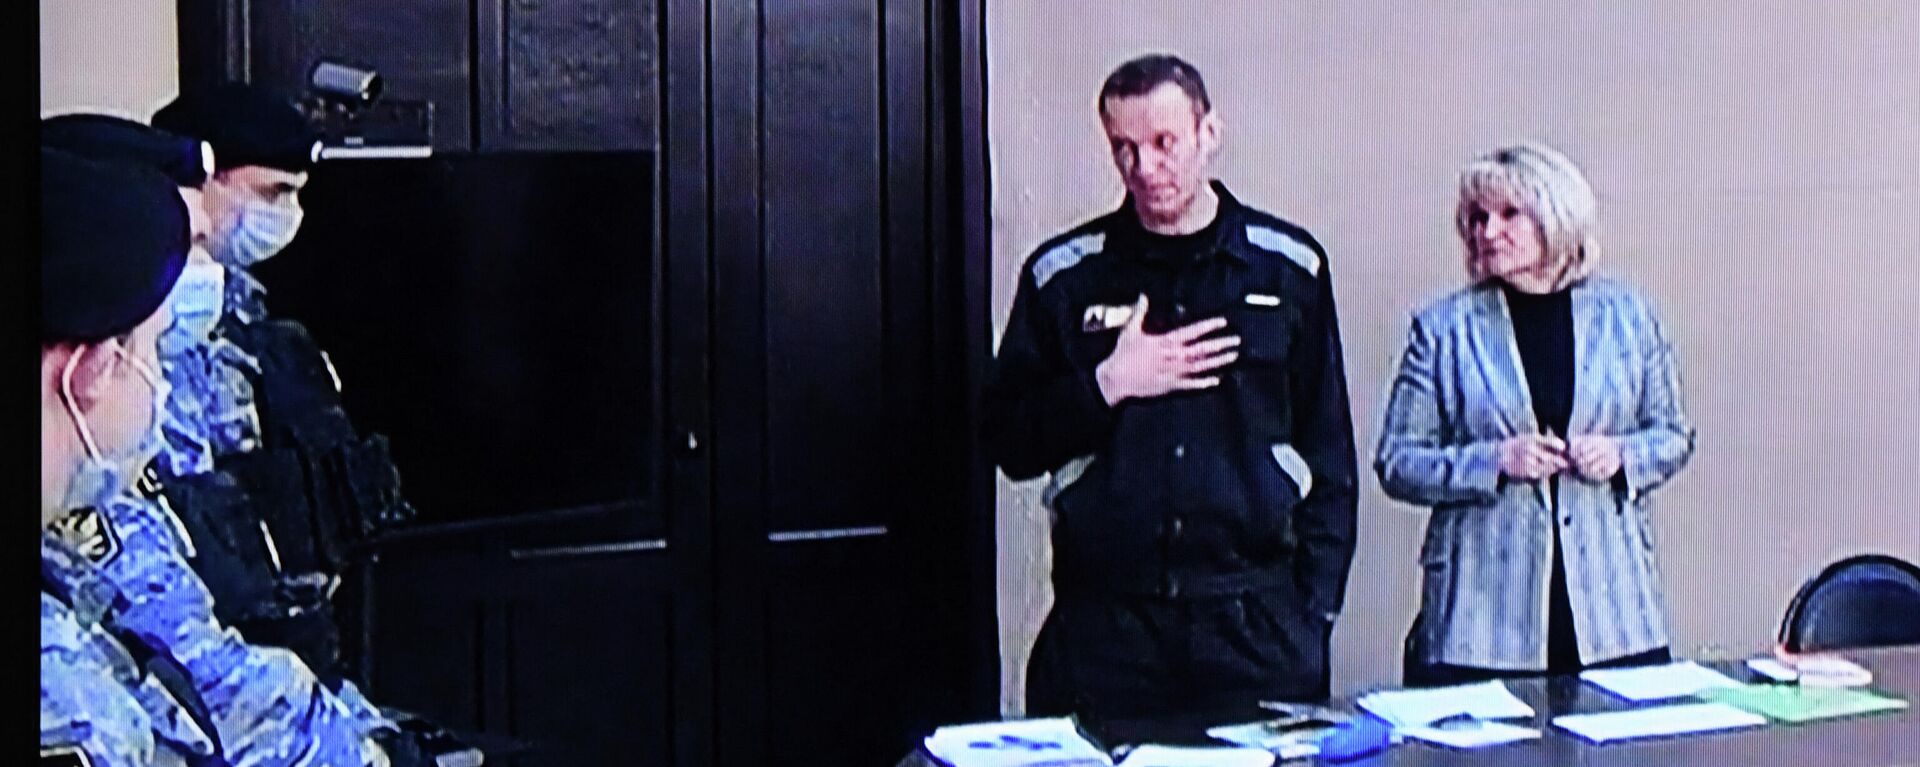 Russian opposition figure Alexei Navalny is seen on a screen via a video link during the verdict in his embezzlement and contempt of court trial at the IK-2 prison colony in the town of Pokrov in Vladimir Region on March 22, 2022. - Sputnik International, 1920, 22.03.2022